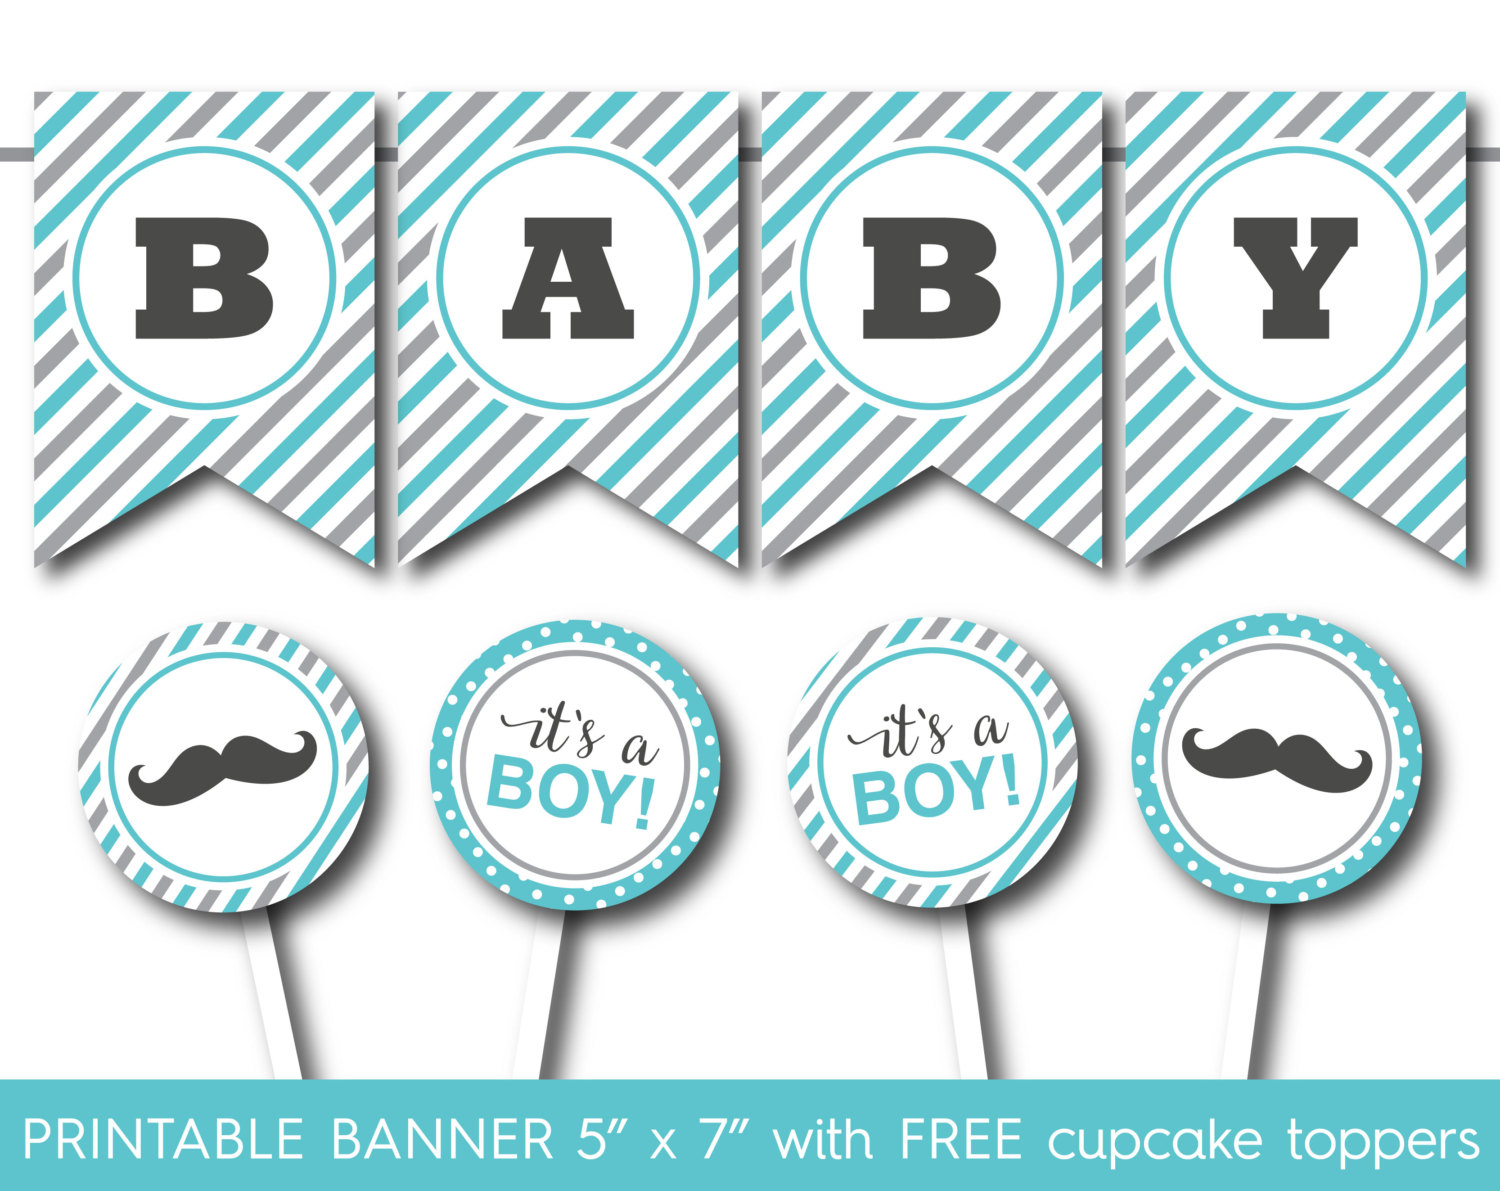 Free Printable Baby Shower Banner Letters - Baby Shower Ideas - Free Printable Baby Shower Banner Letters